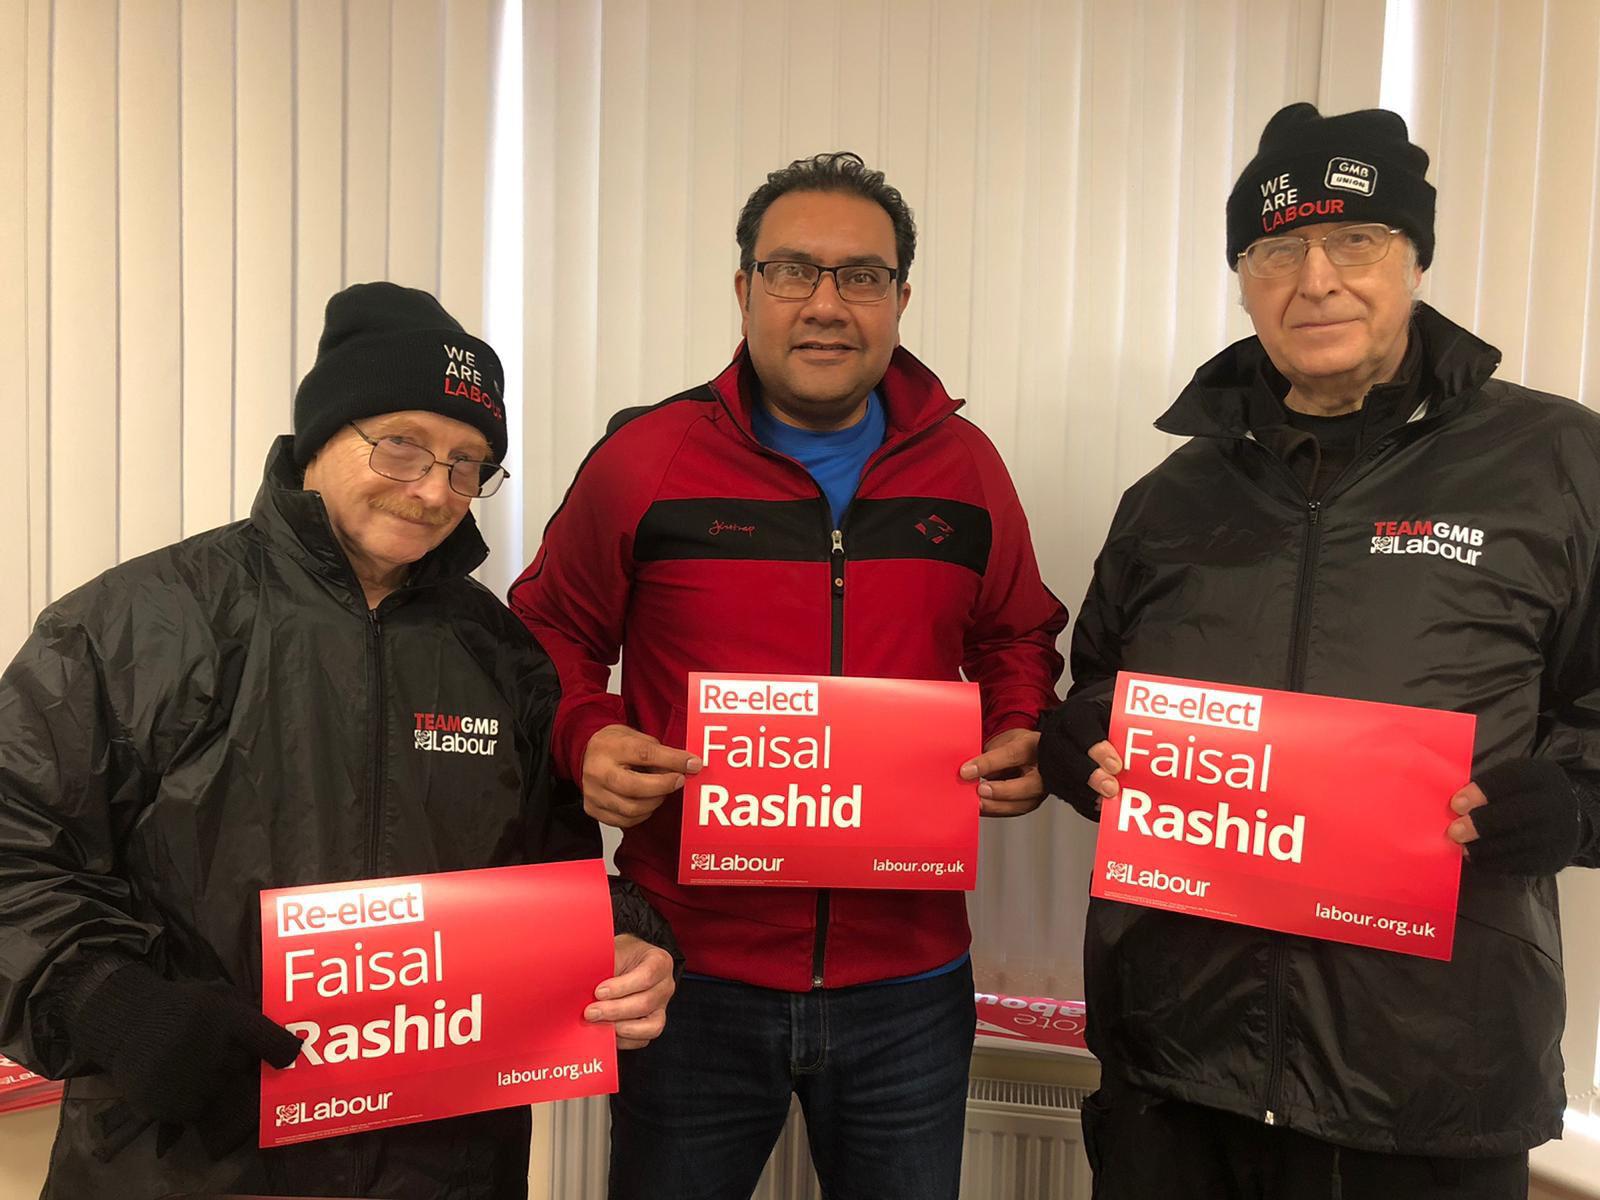 Mian Faisal Rashid (born 6 September 1972) is a British Labour Party politician. He was the Member of Parliament (MP) for Warrington South.